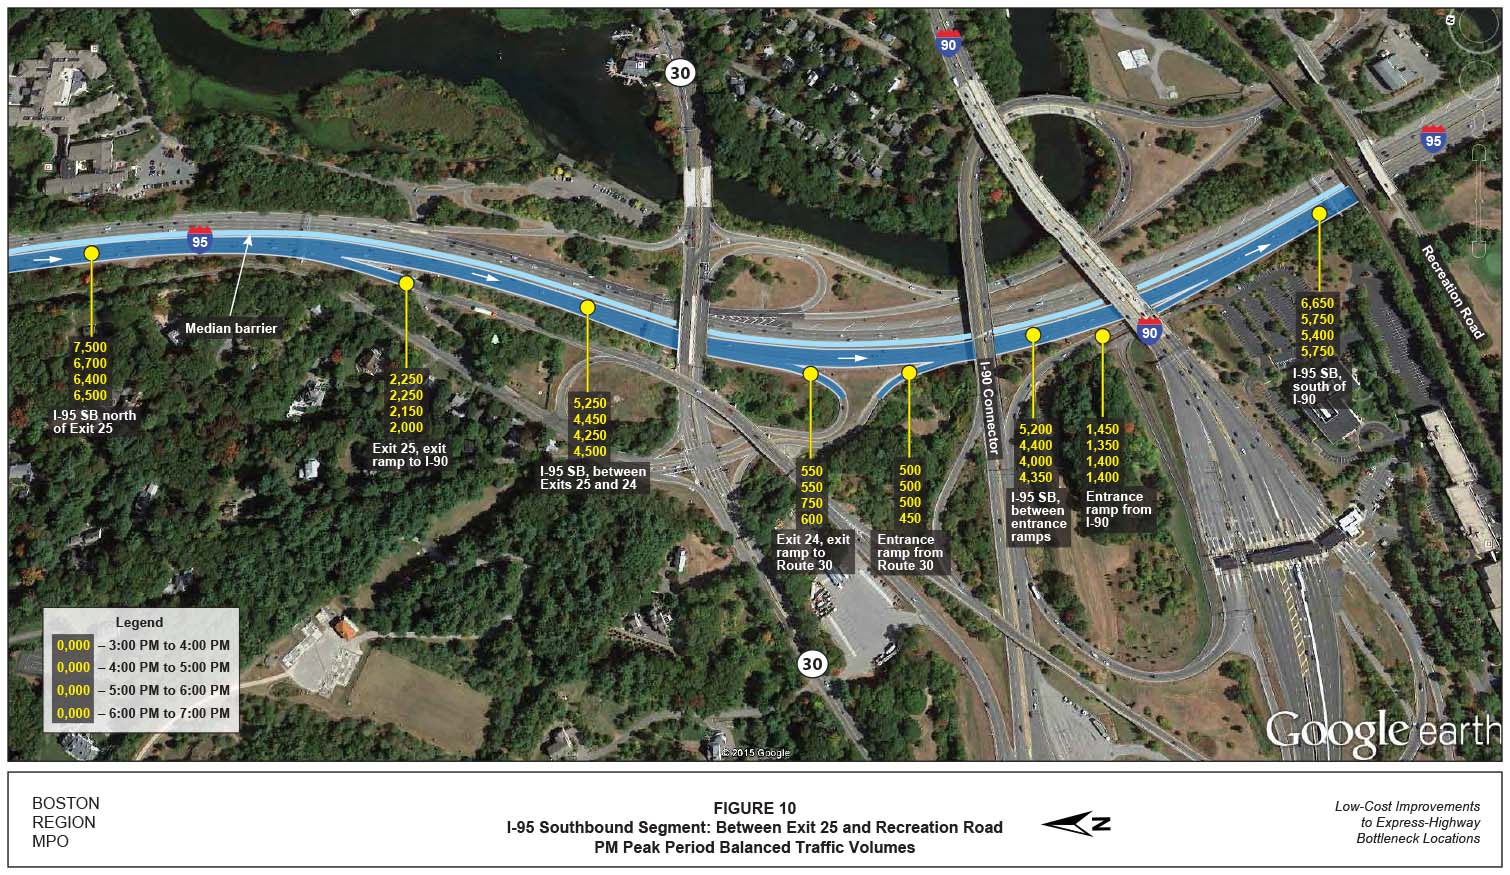 FIGURE 10. Aerial-view map showing the PM peak-period balanced traffic volumes for the I-95 southbound segment between Exit 25 and Recreation Road